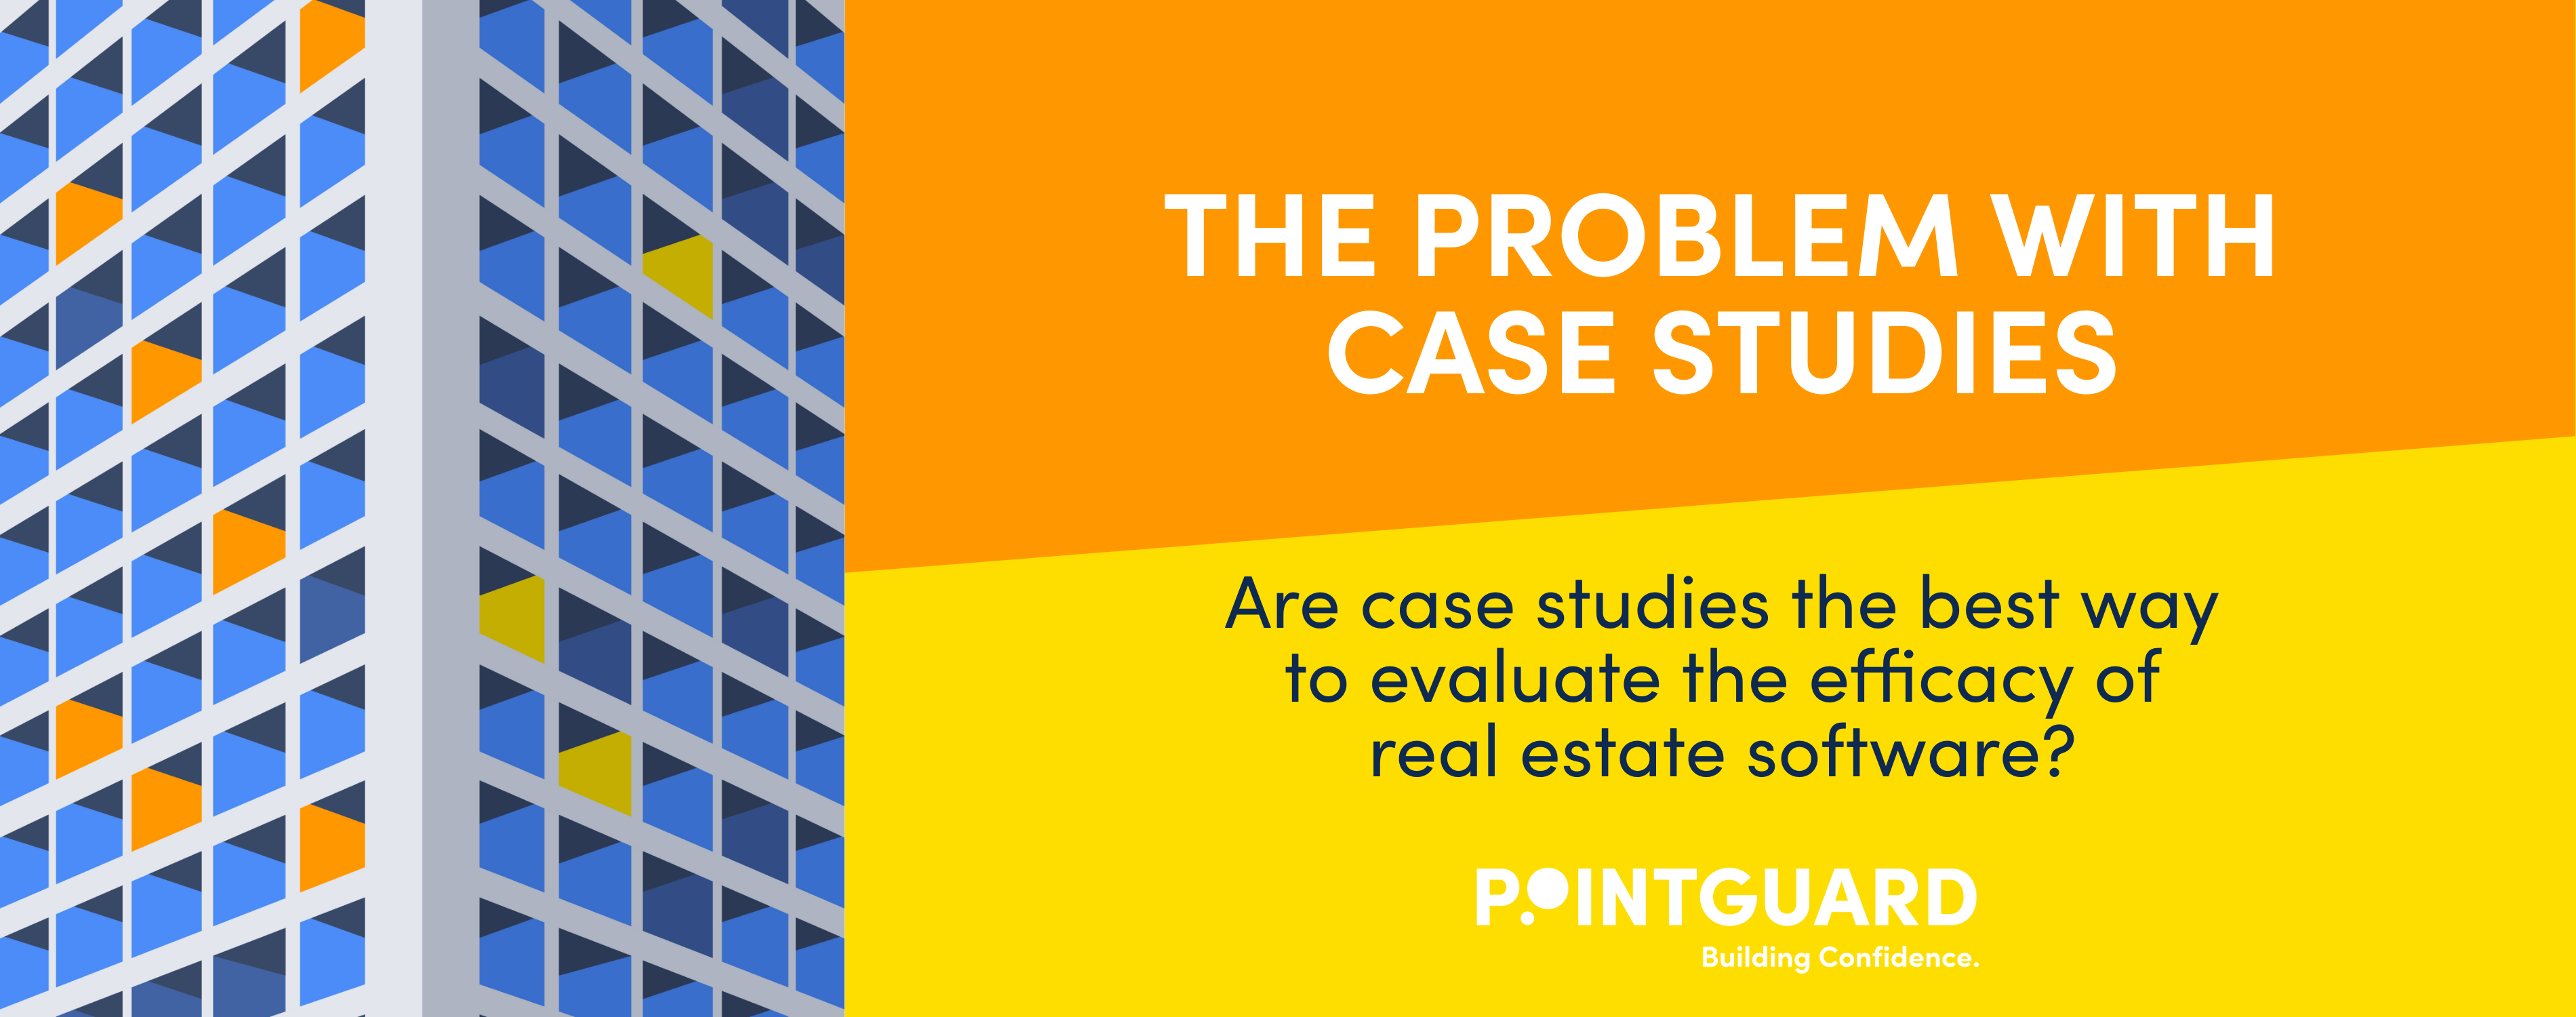 The Problem with Case Studies